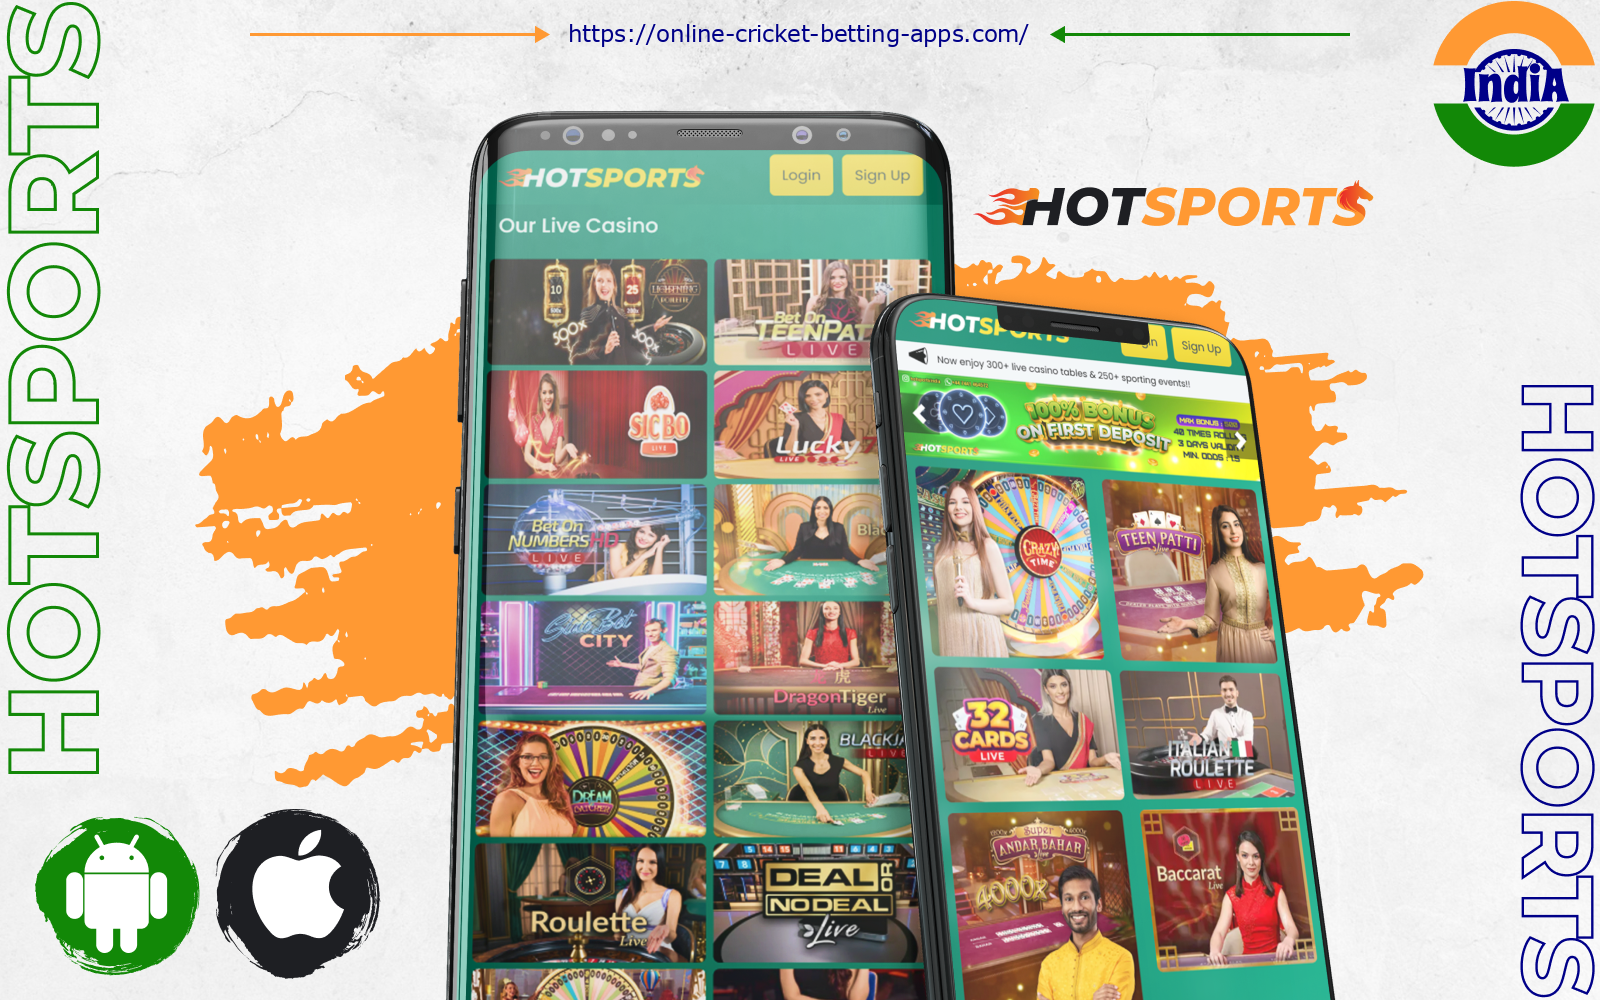 Hot Sports deserves a spot in the top 10 best cricket betting apps in India